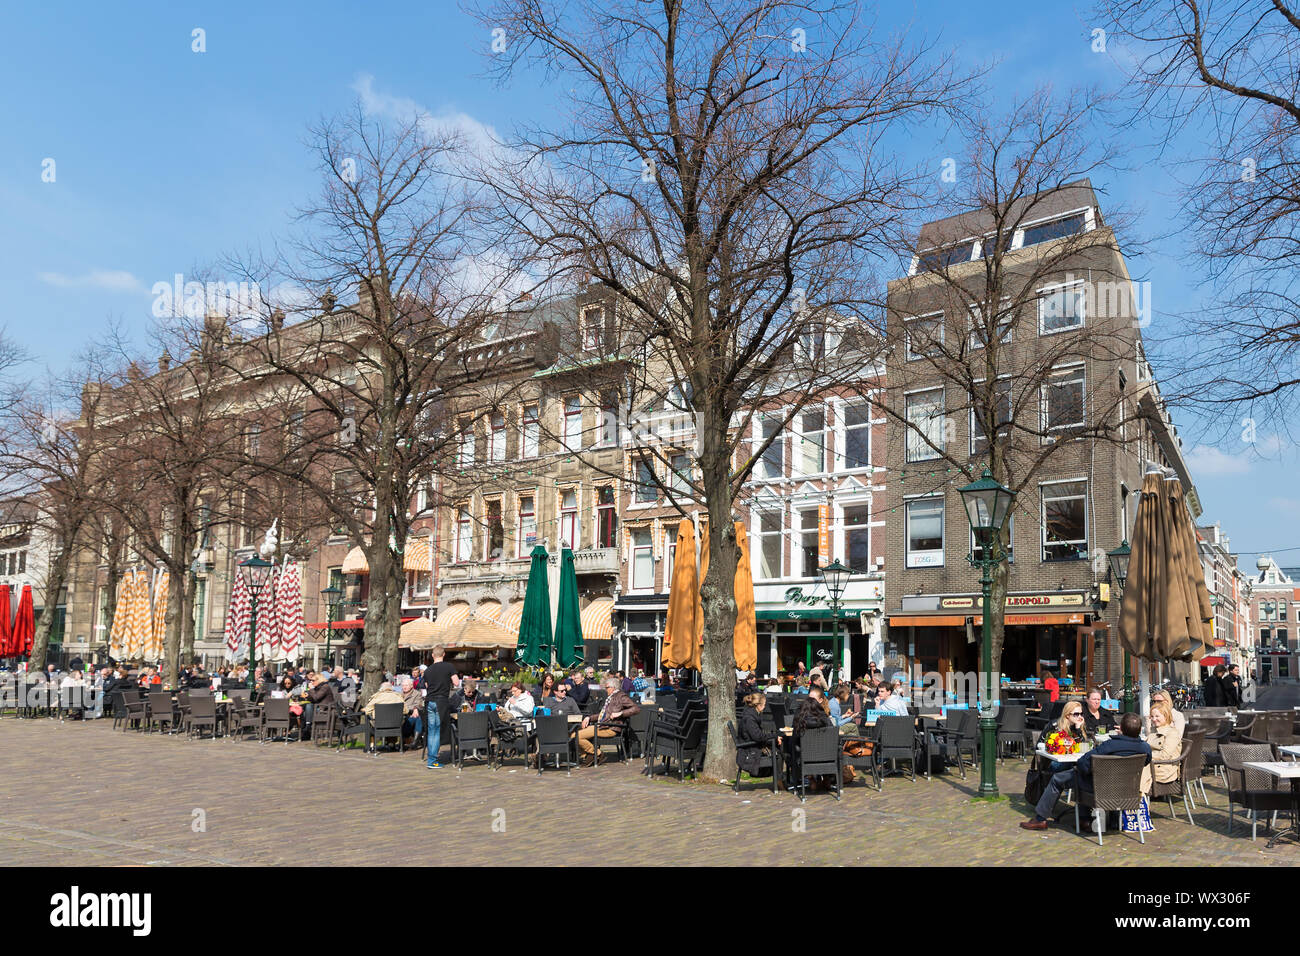 People take a drink at the terraces of The Hague, the Netherlands Stock Photo